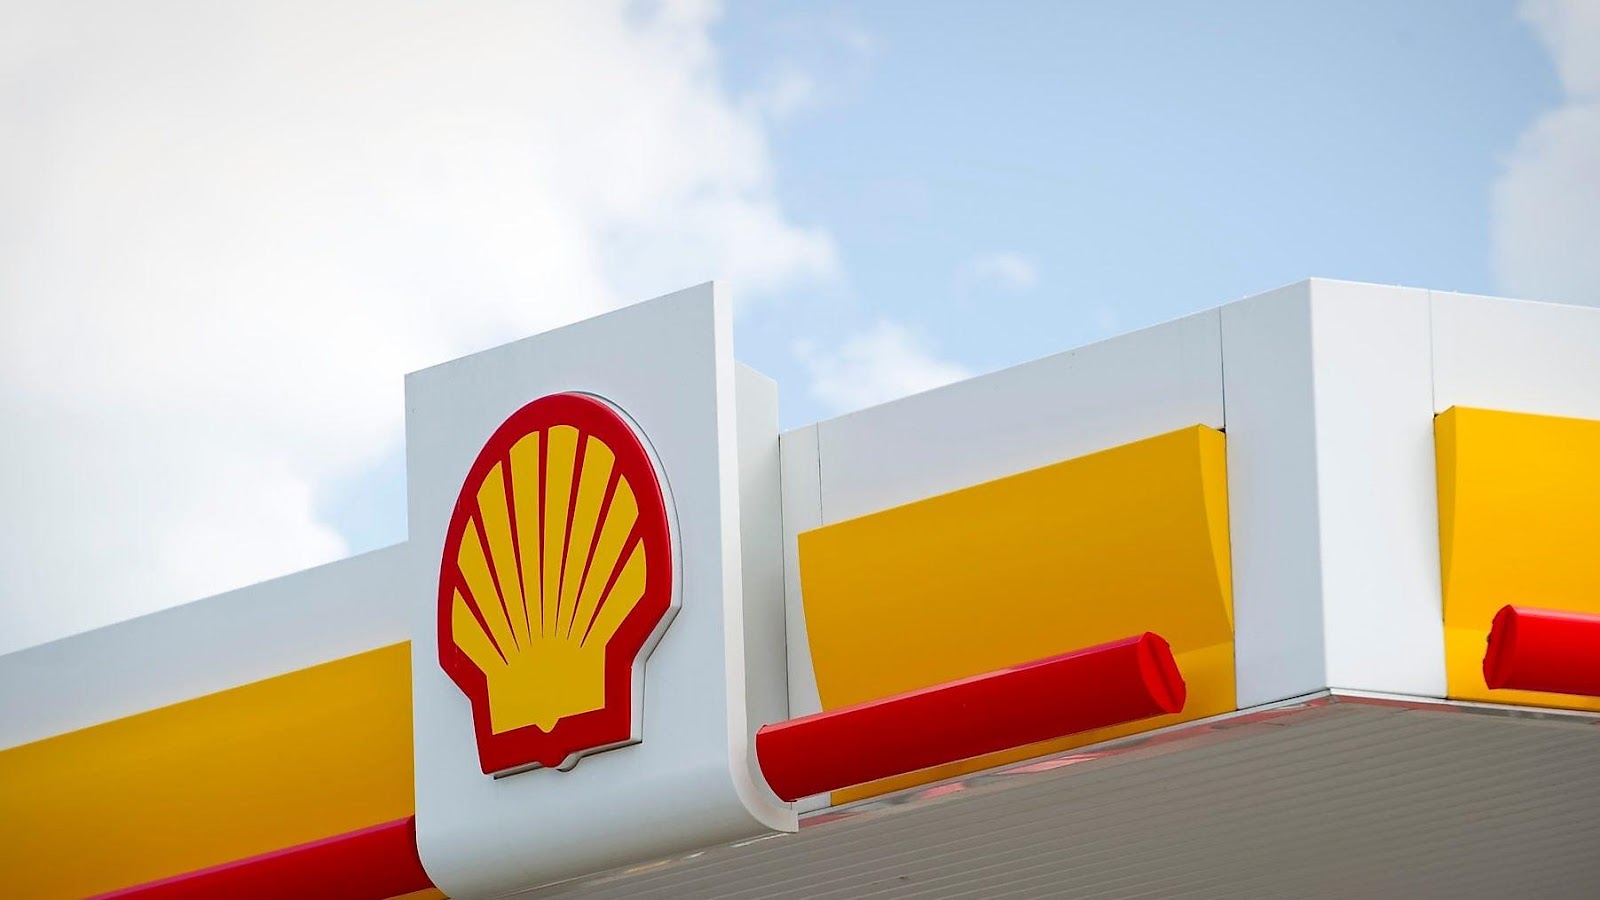 In 2022, Shell’s profit doubled